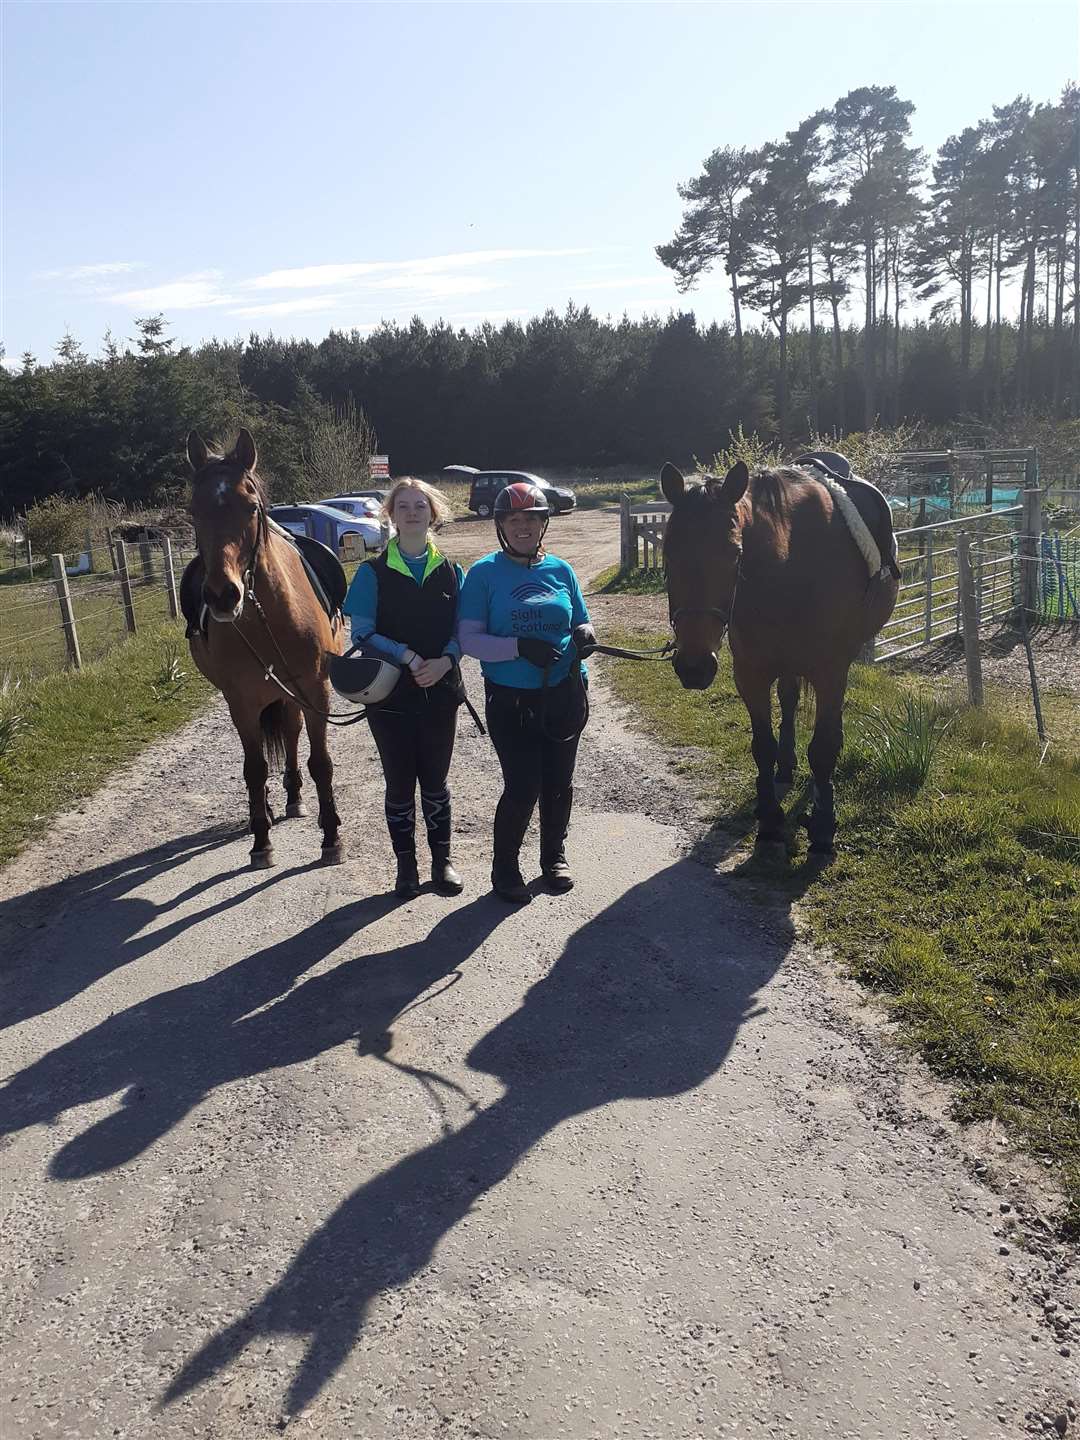 Imogen and Cheryll Hilton with horses Lucky and Tobias.